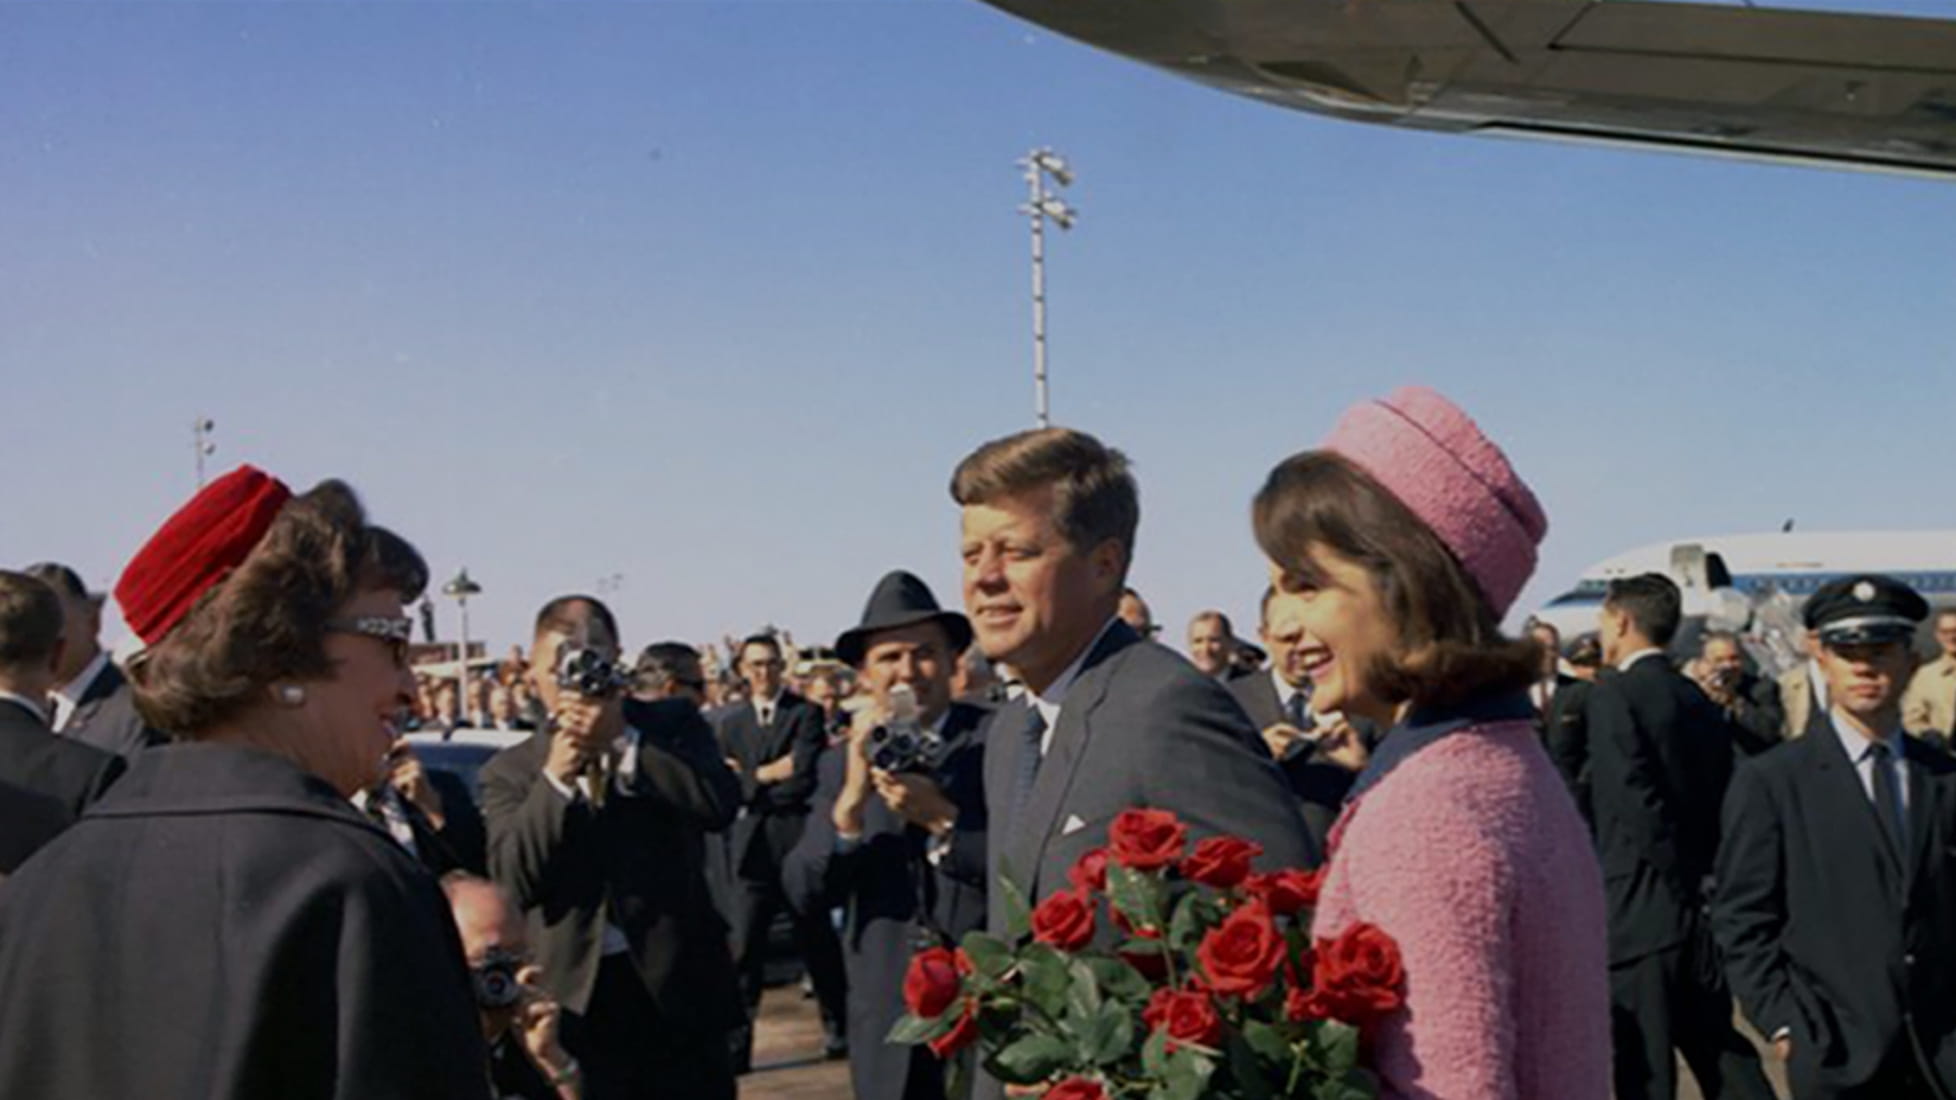 JFK: 24 Hours That Changed the World